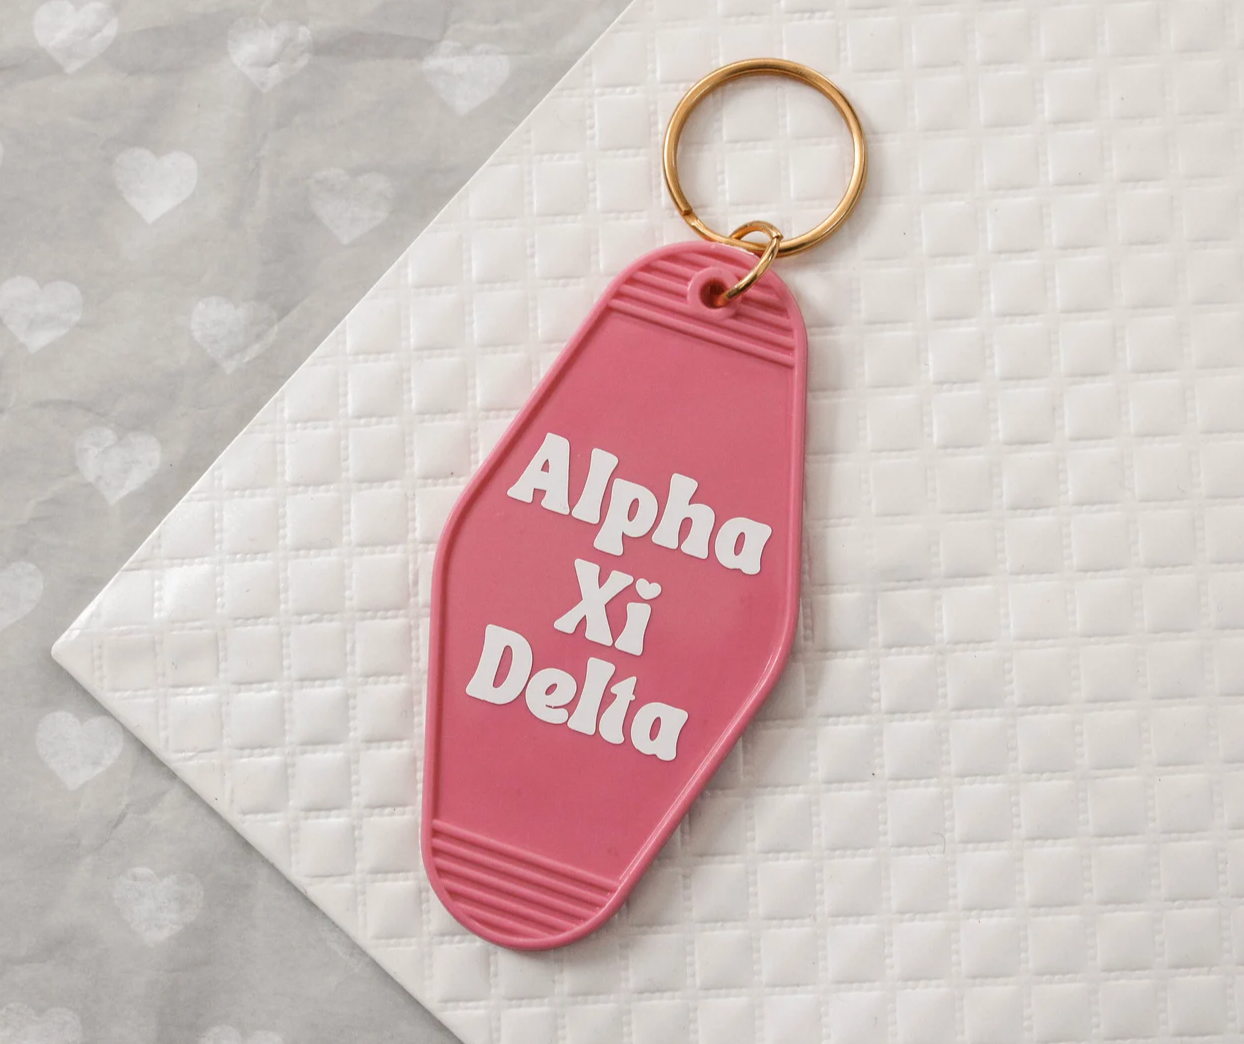 Alpha Xi Delta Motel Hotel Key Chain in Hot pink with white letters and gold ring. AXiD AXD